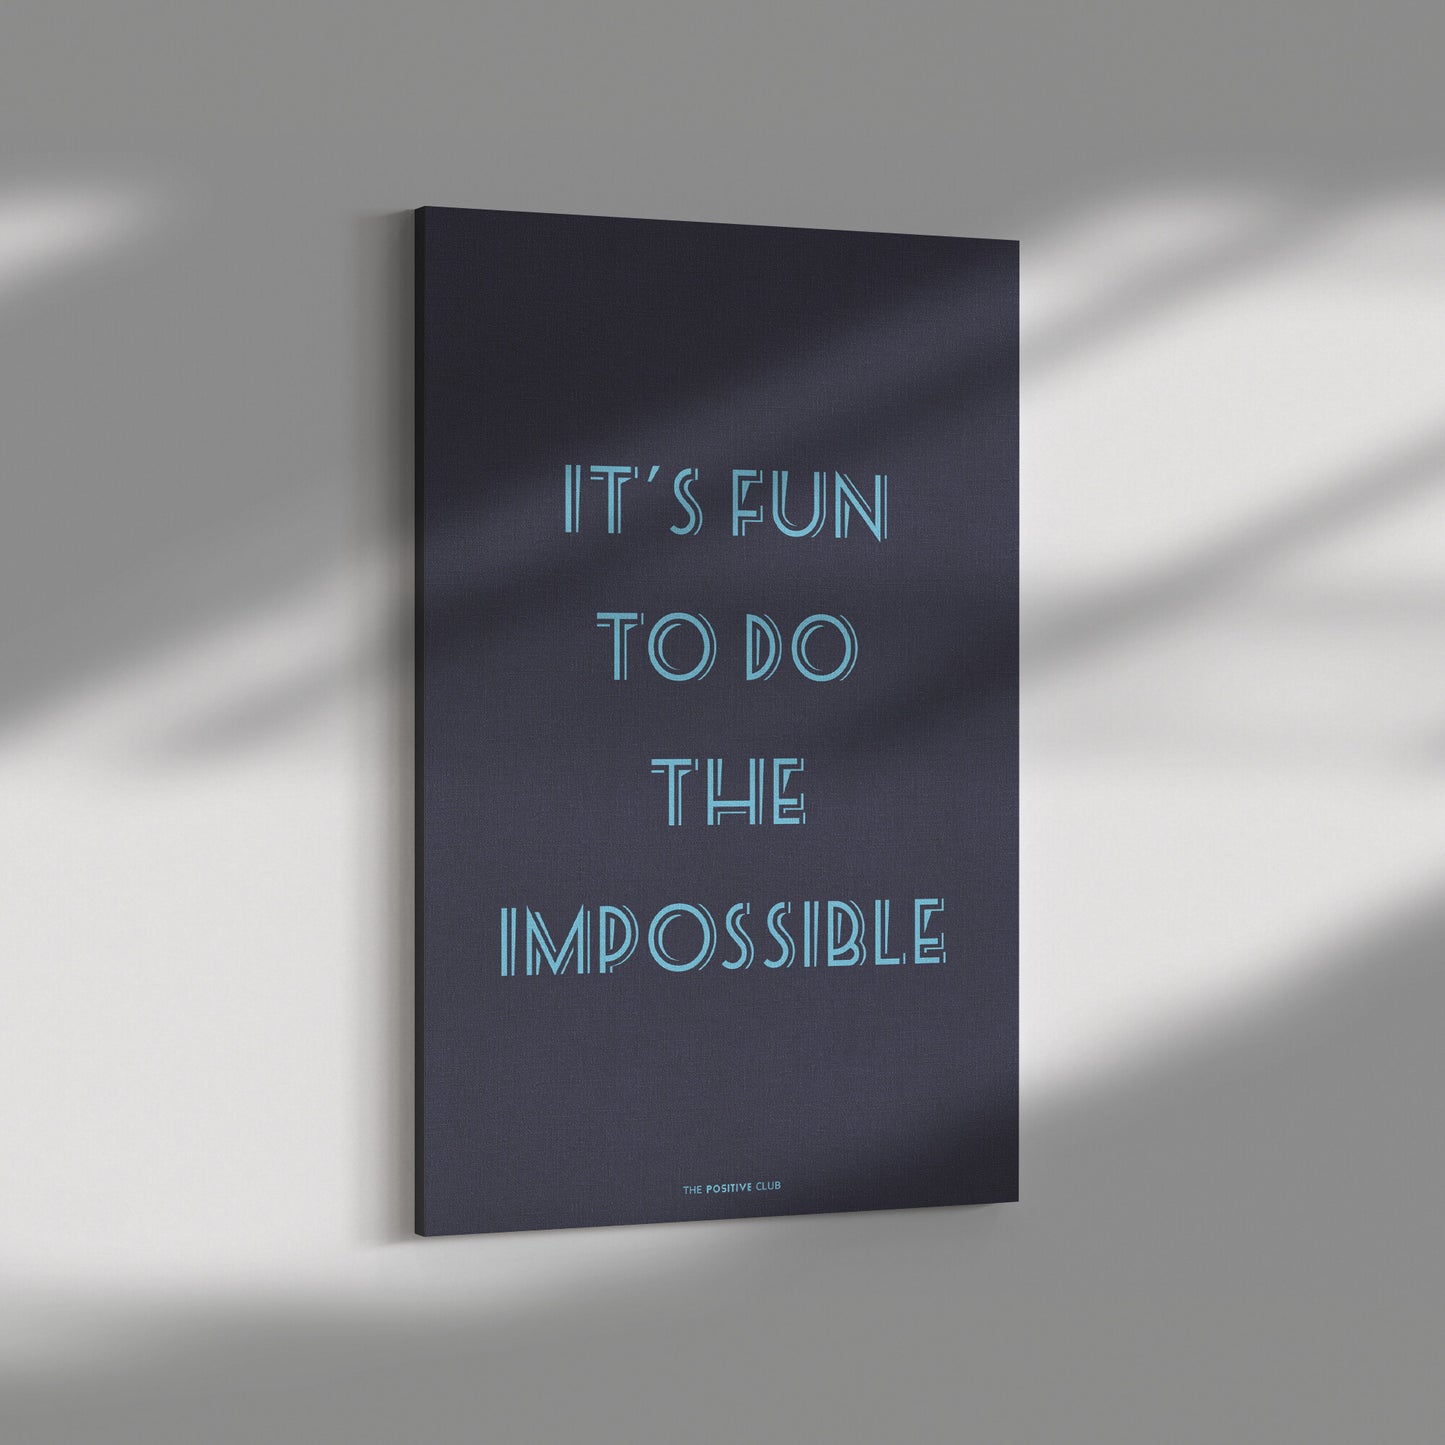 IT’S FUN TO DO THE IMPOSSIBLE